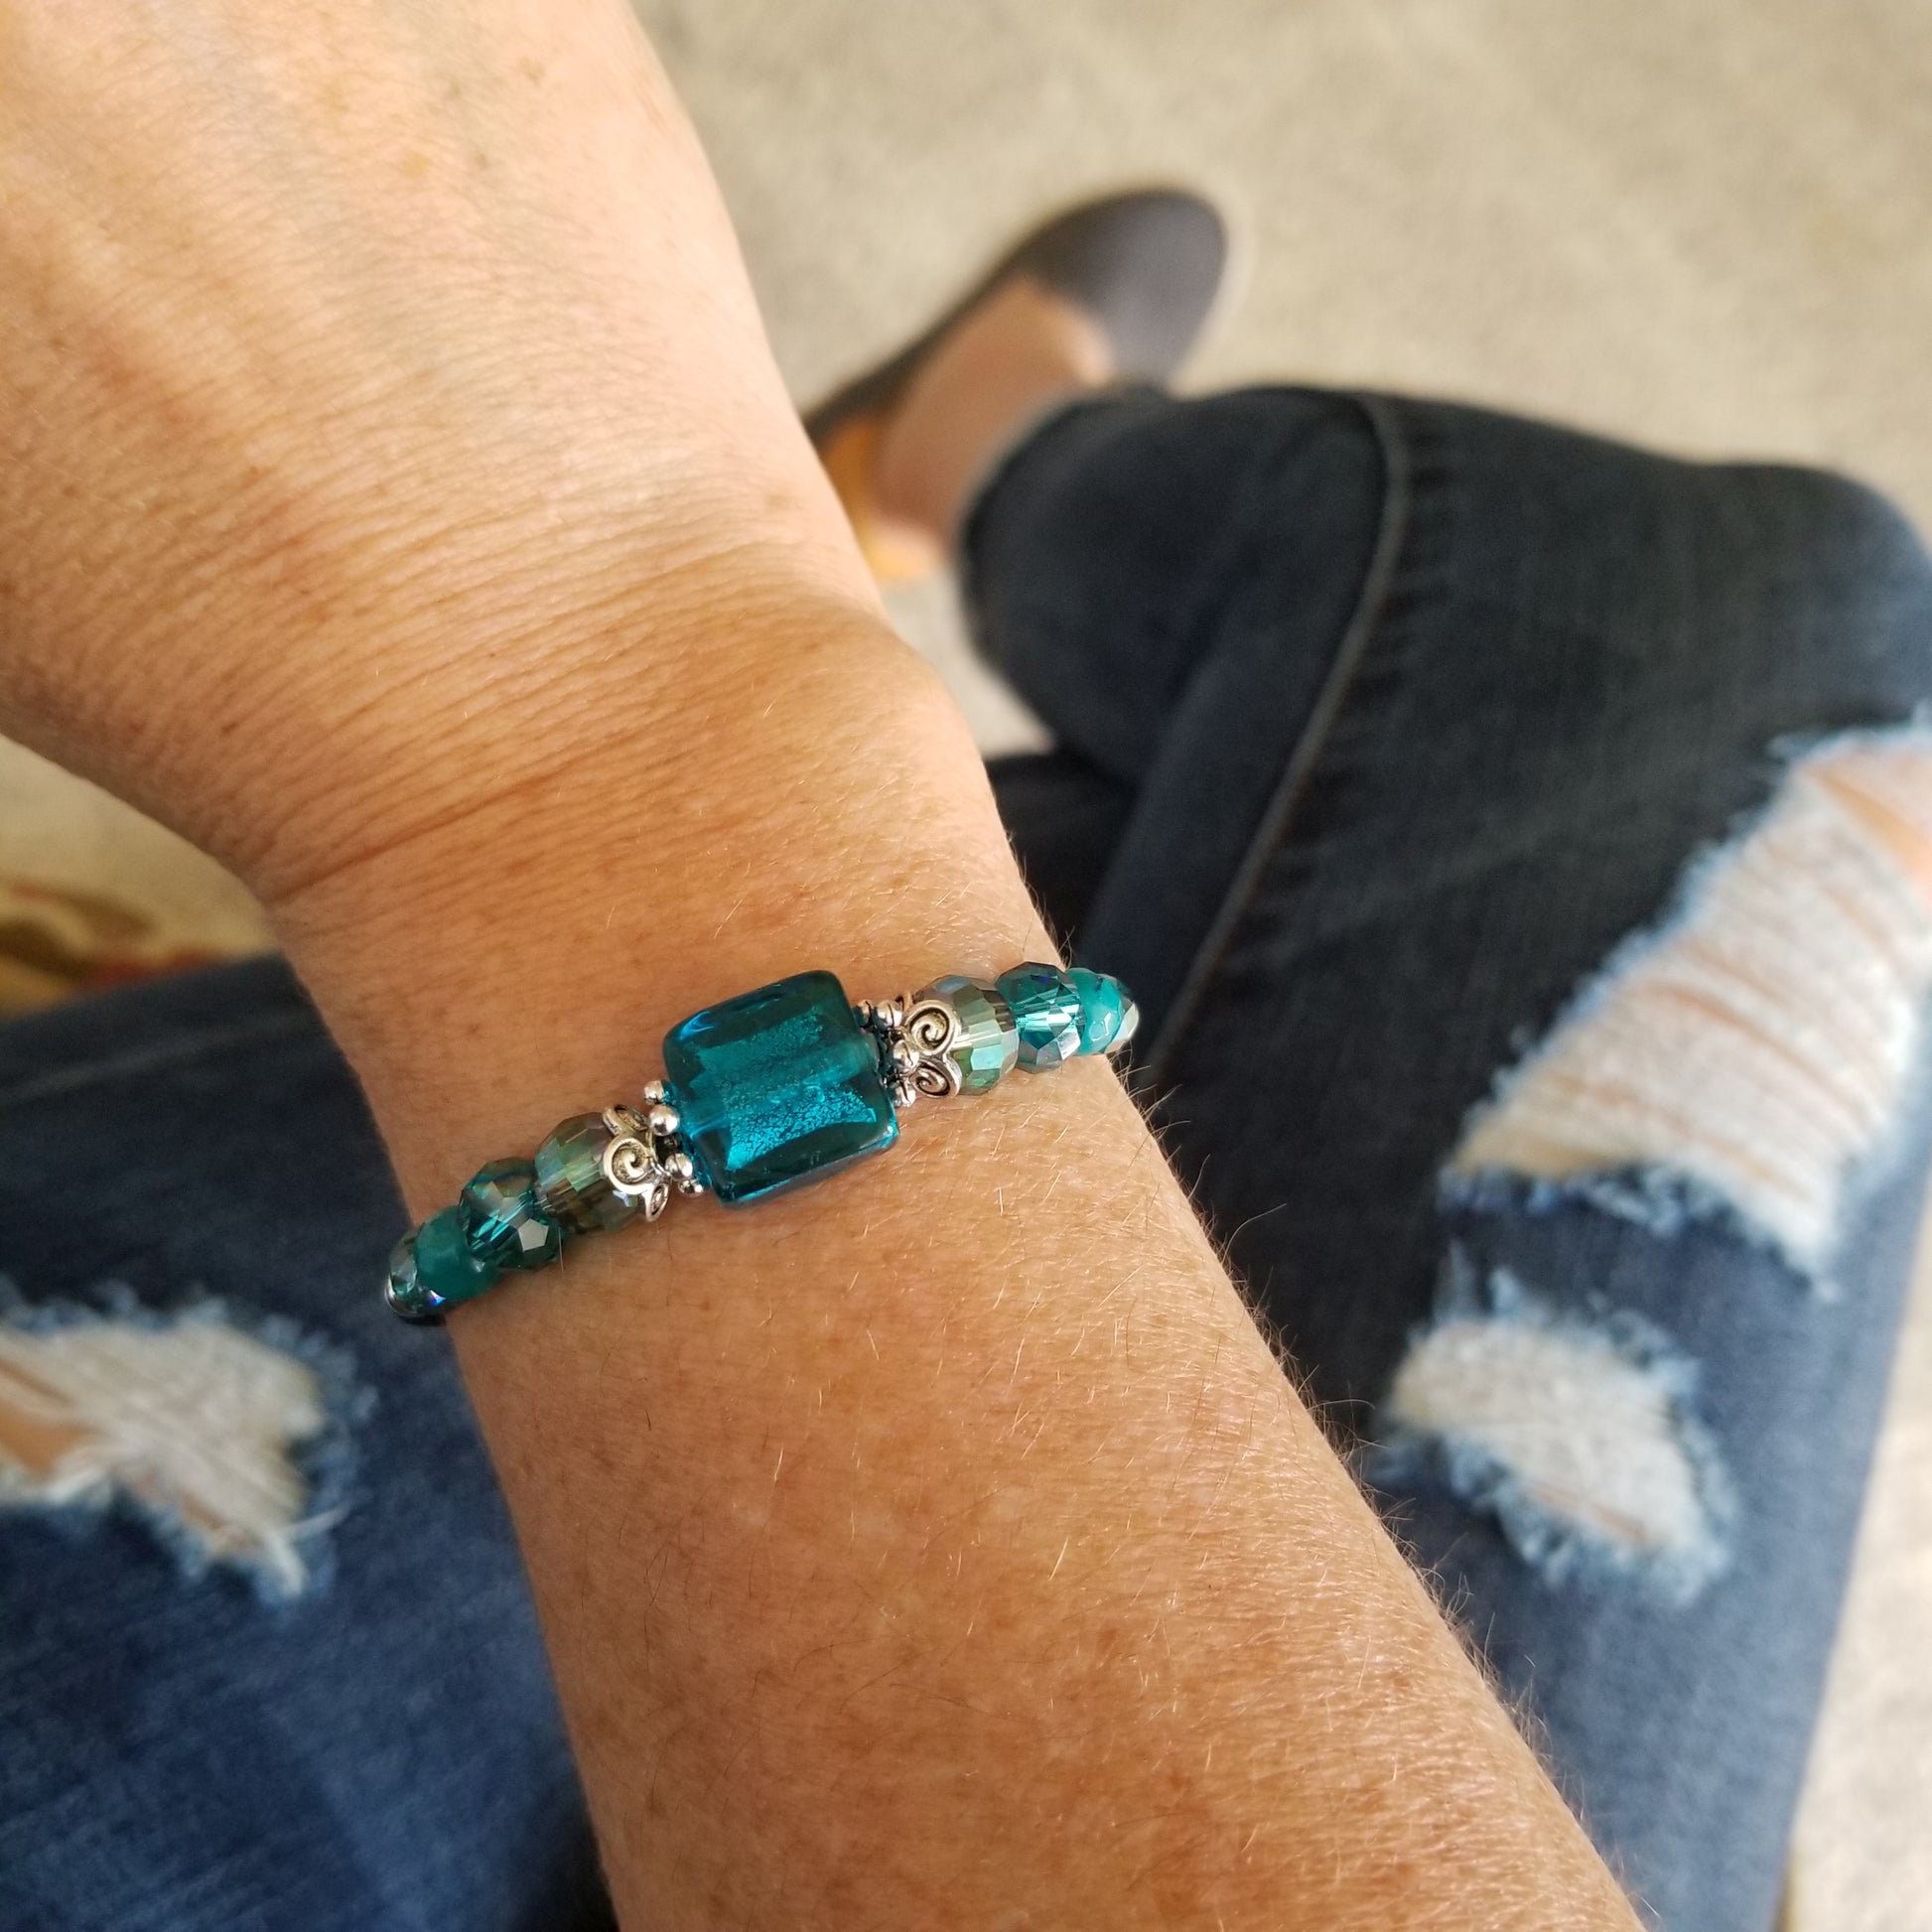 teal foil glass with coordinating beads wrap bracelet on wrist